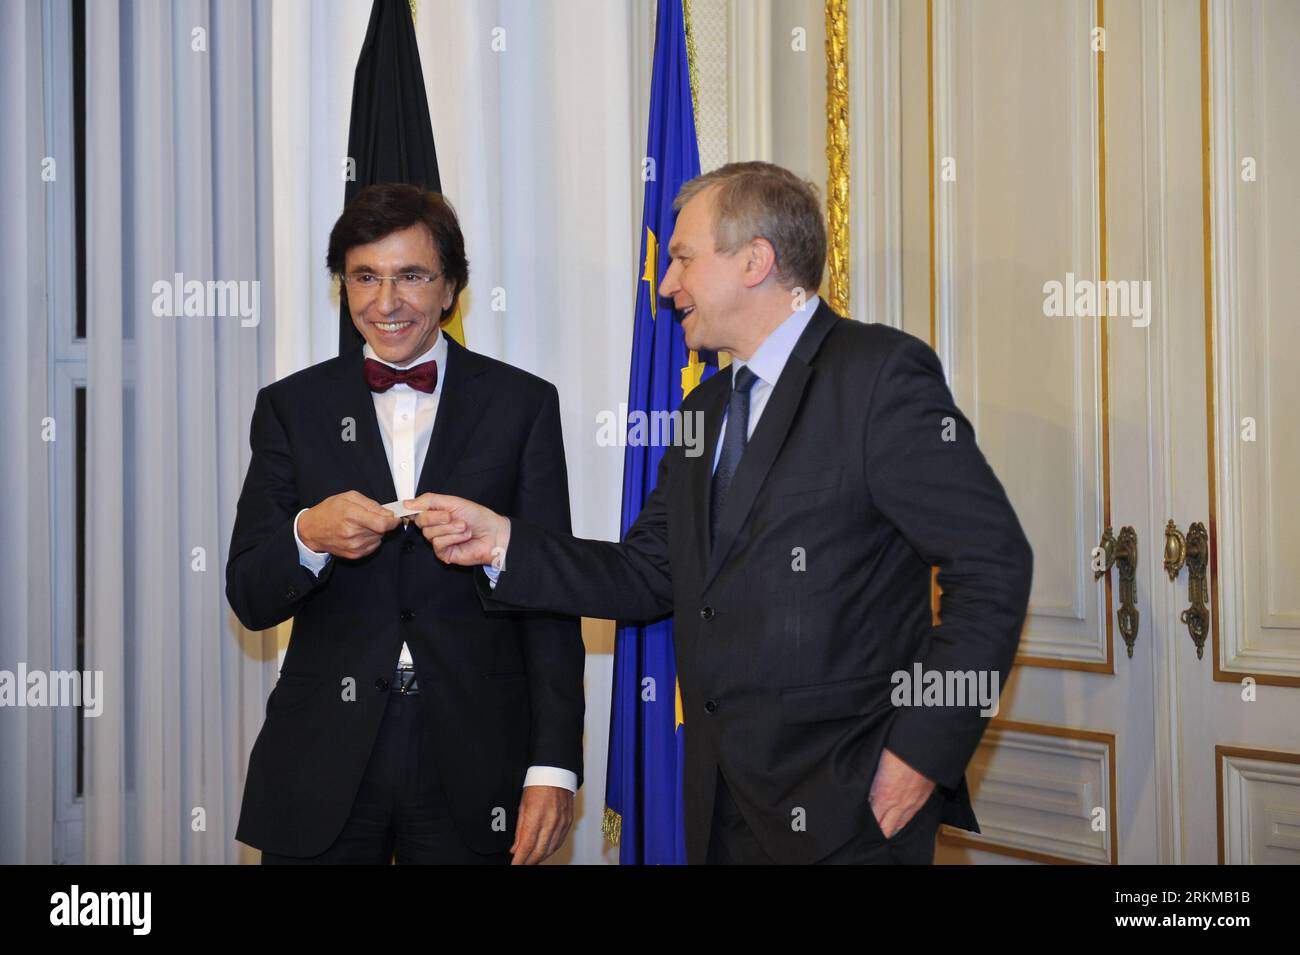 Bildnummer: 56651942  Datum: 06.12.2011  Copyright: imago/Xinhua (111206) -- BRUSSELS, Dec. 6, 2011 (Xinhua) -- Belgian new Prime Minister Elio Di Rupo (L) receives symbolic office card from outgoing Prime Minister Yves Leterme at the Prime Minister s residence in Brussels, capital of Belgium, Dec. 6, 2011. The inauguration of the new government marked the ending of a record 18-months long political deadlock of Belgium. (Xinhua/Ye Pingfan) (ypf) BELGIUM-BRUSSELS-NEW GOVERNMENT PUBLICATIONxNOTxINxCHN People Politik neue Regierung Belgien x0x xtm 2011 quer      56651942 Date 06 12 2011 Copyright Stock Photo